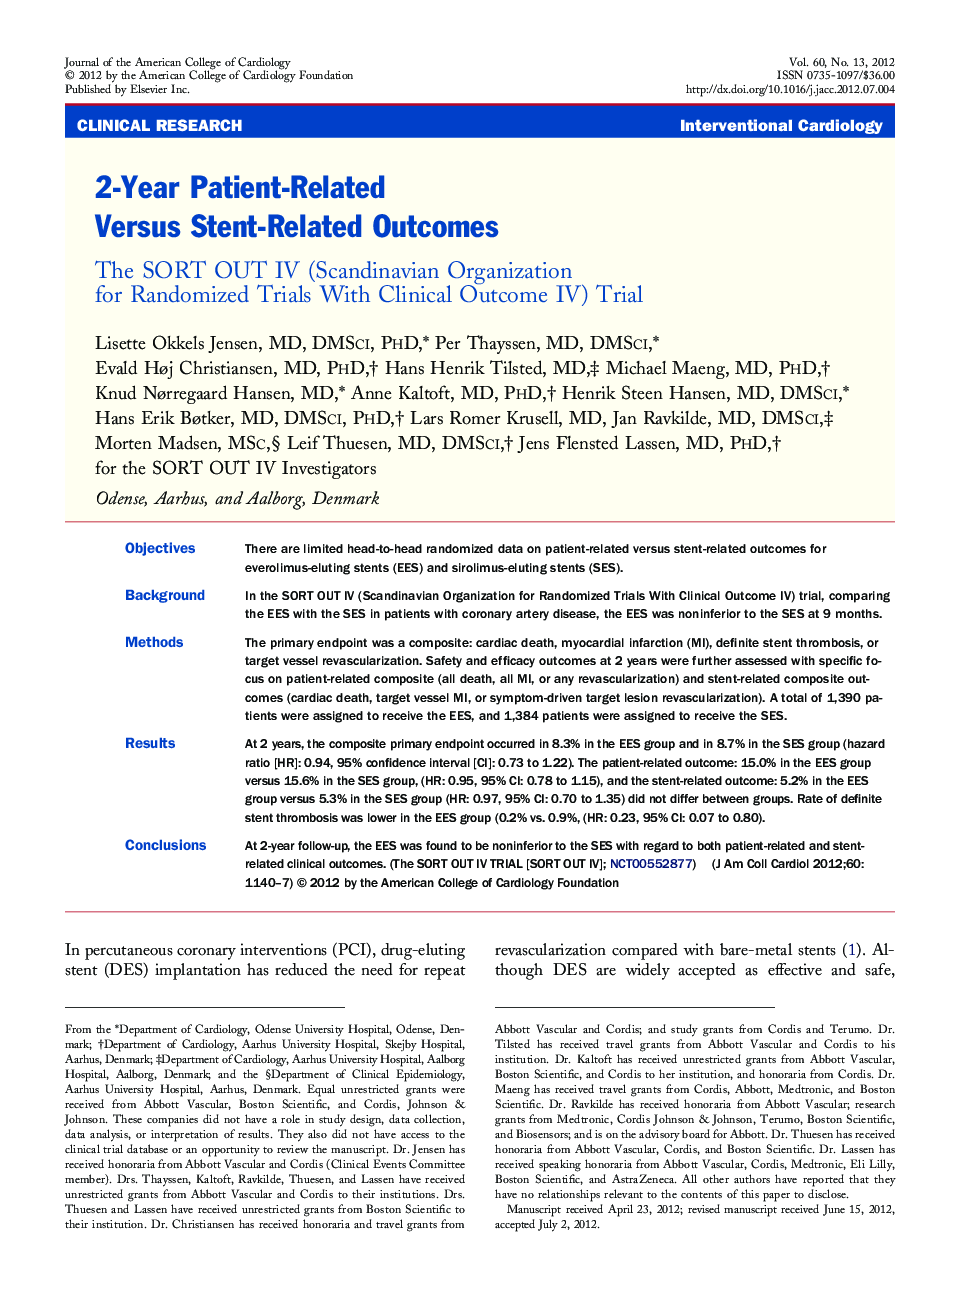 2-Year Patient-Related Versus Stent-Related Outcomes : The SORT OUT IV (Scandinavian Organization for Randomized Trials With Clinical Outcome IV) Trial